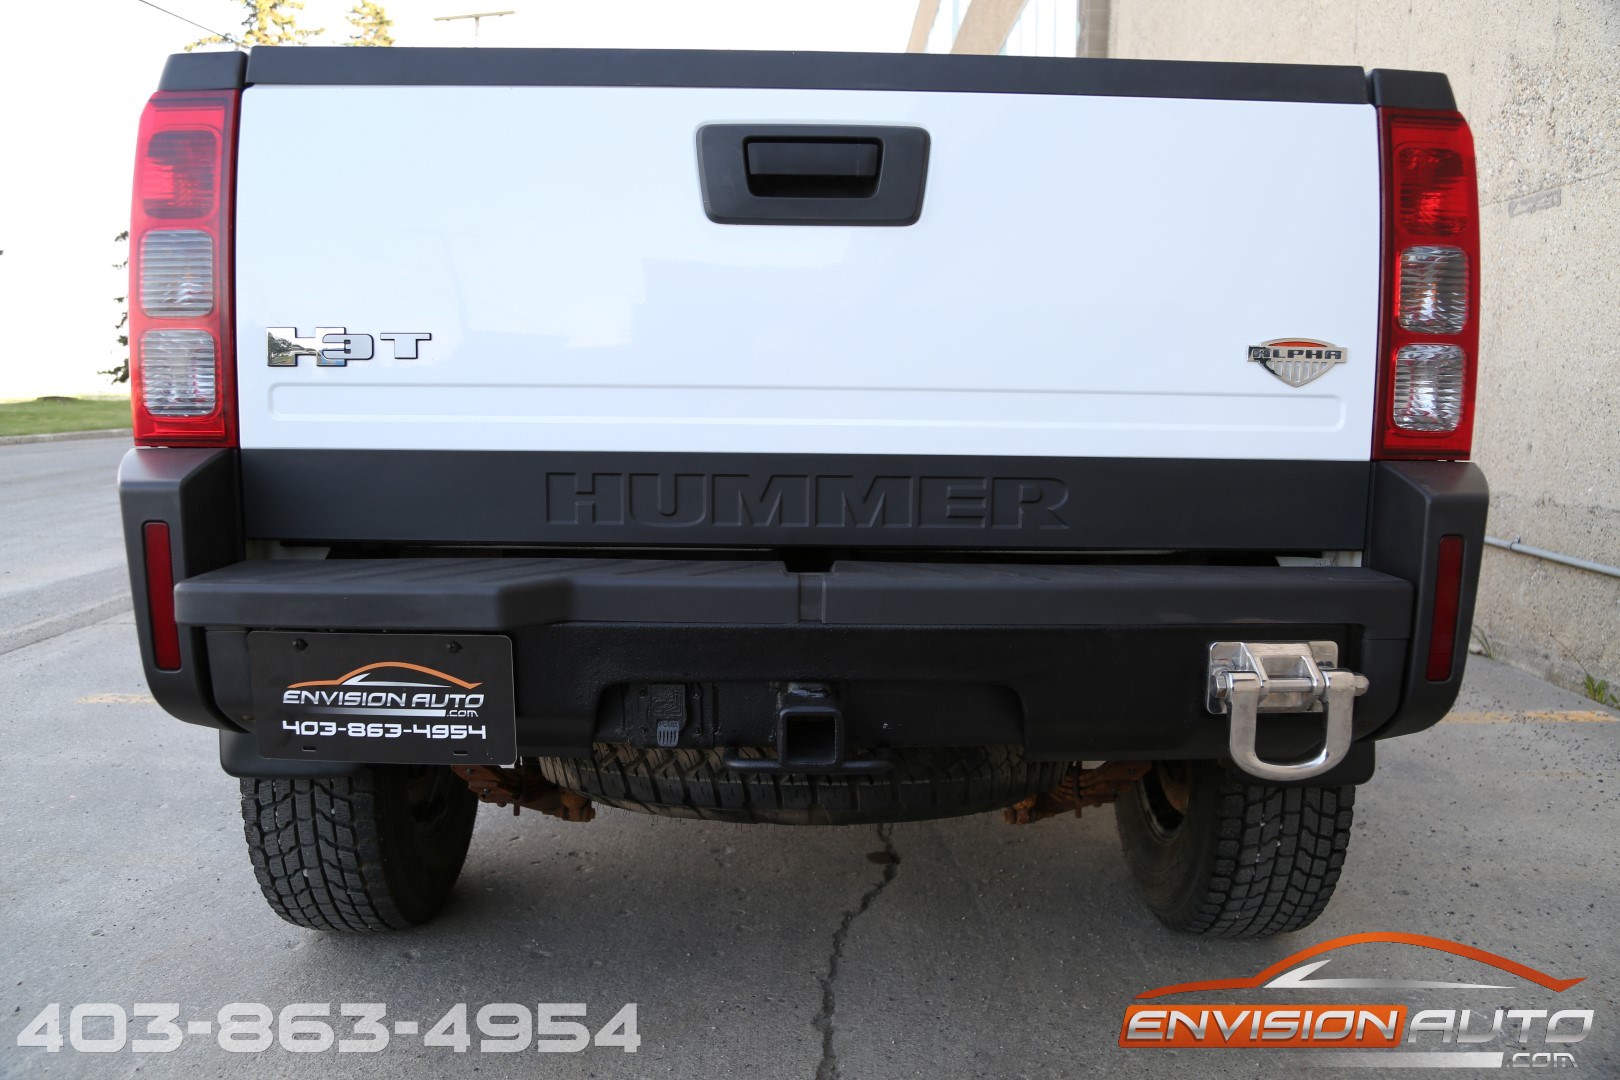 Saleh 4X4 - Tuning - SALEH4x4 is ur destination for all 4x4 accessories &  off-road tuning! Best Quality & Prices! #HUMMER #H3 FRONT/REAR #BUMPERGUARD  #ROOFRACK #SIDEBARS #LEDS #TUNING #CUSTOMIZED #BEAST